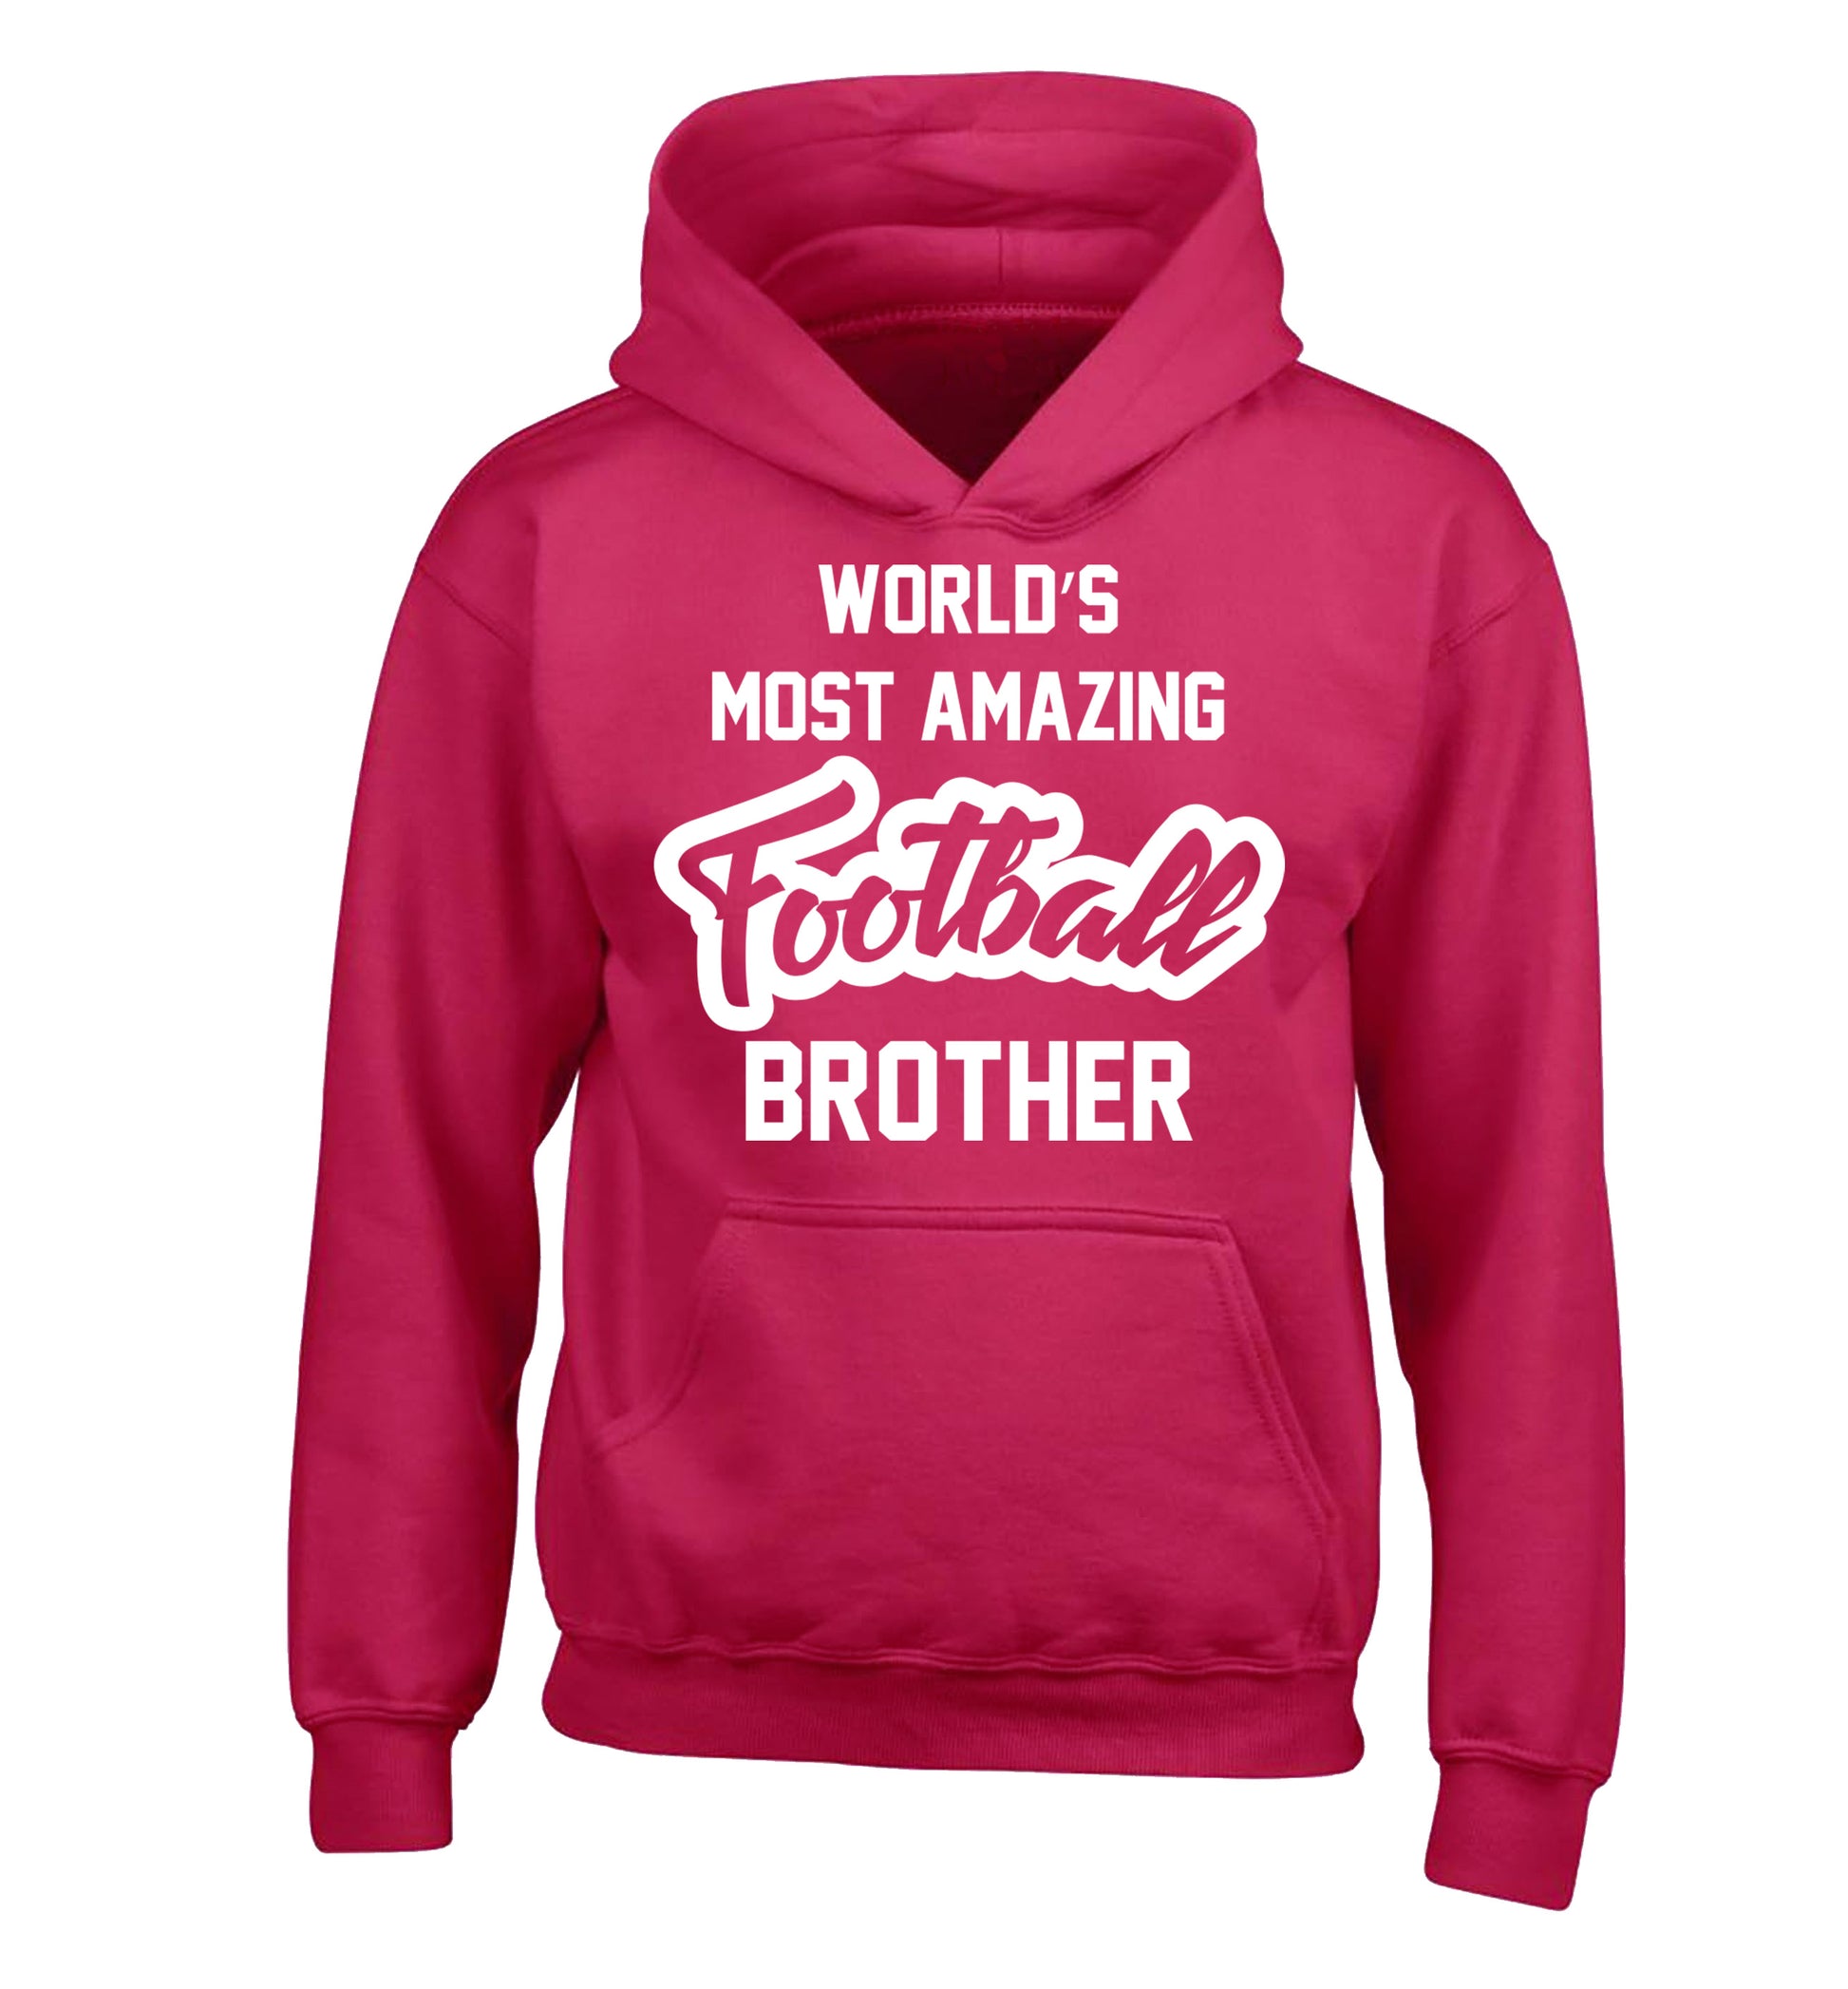 Worlds most amazing football brother children's pink hoodie 12-14 Years